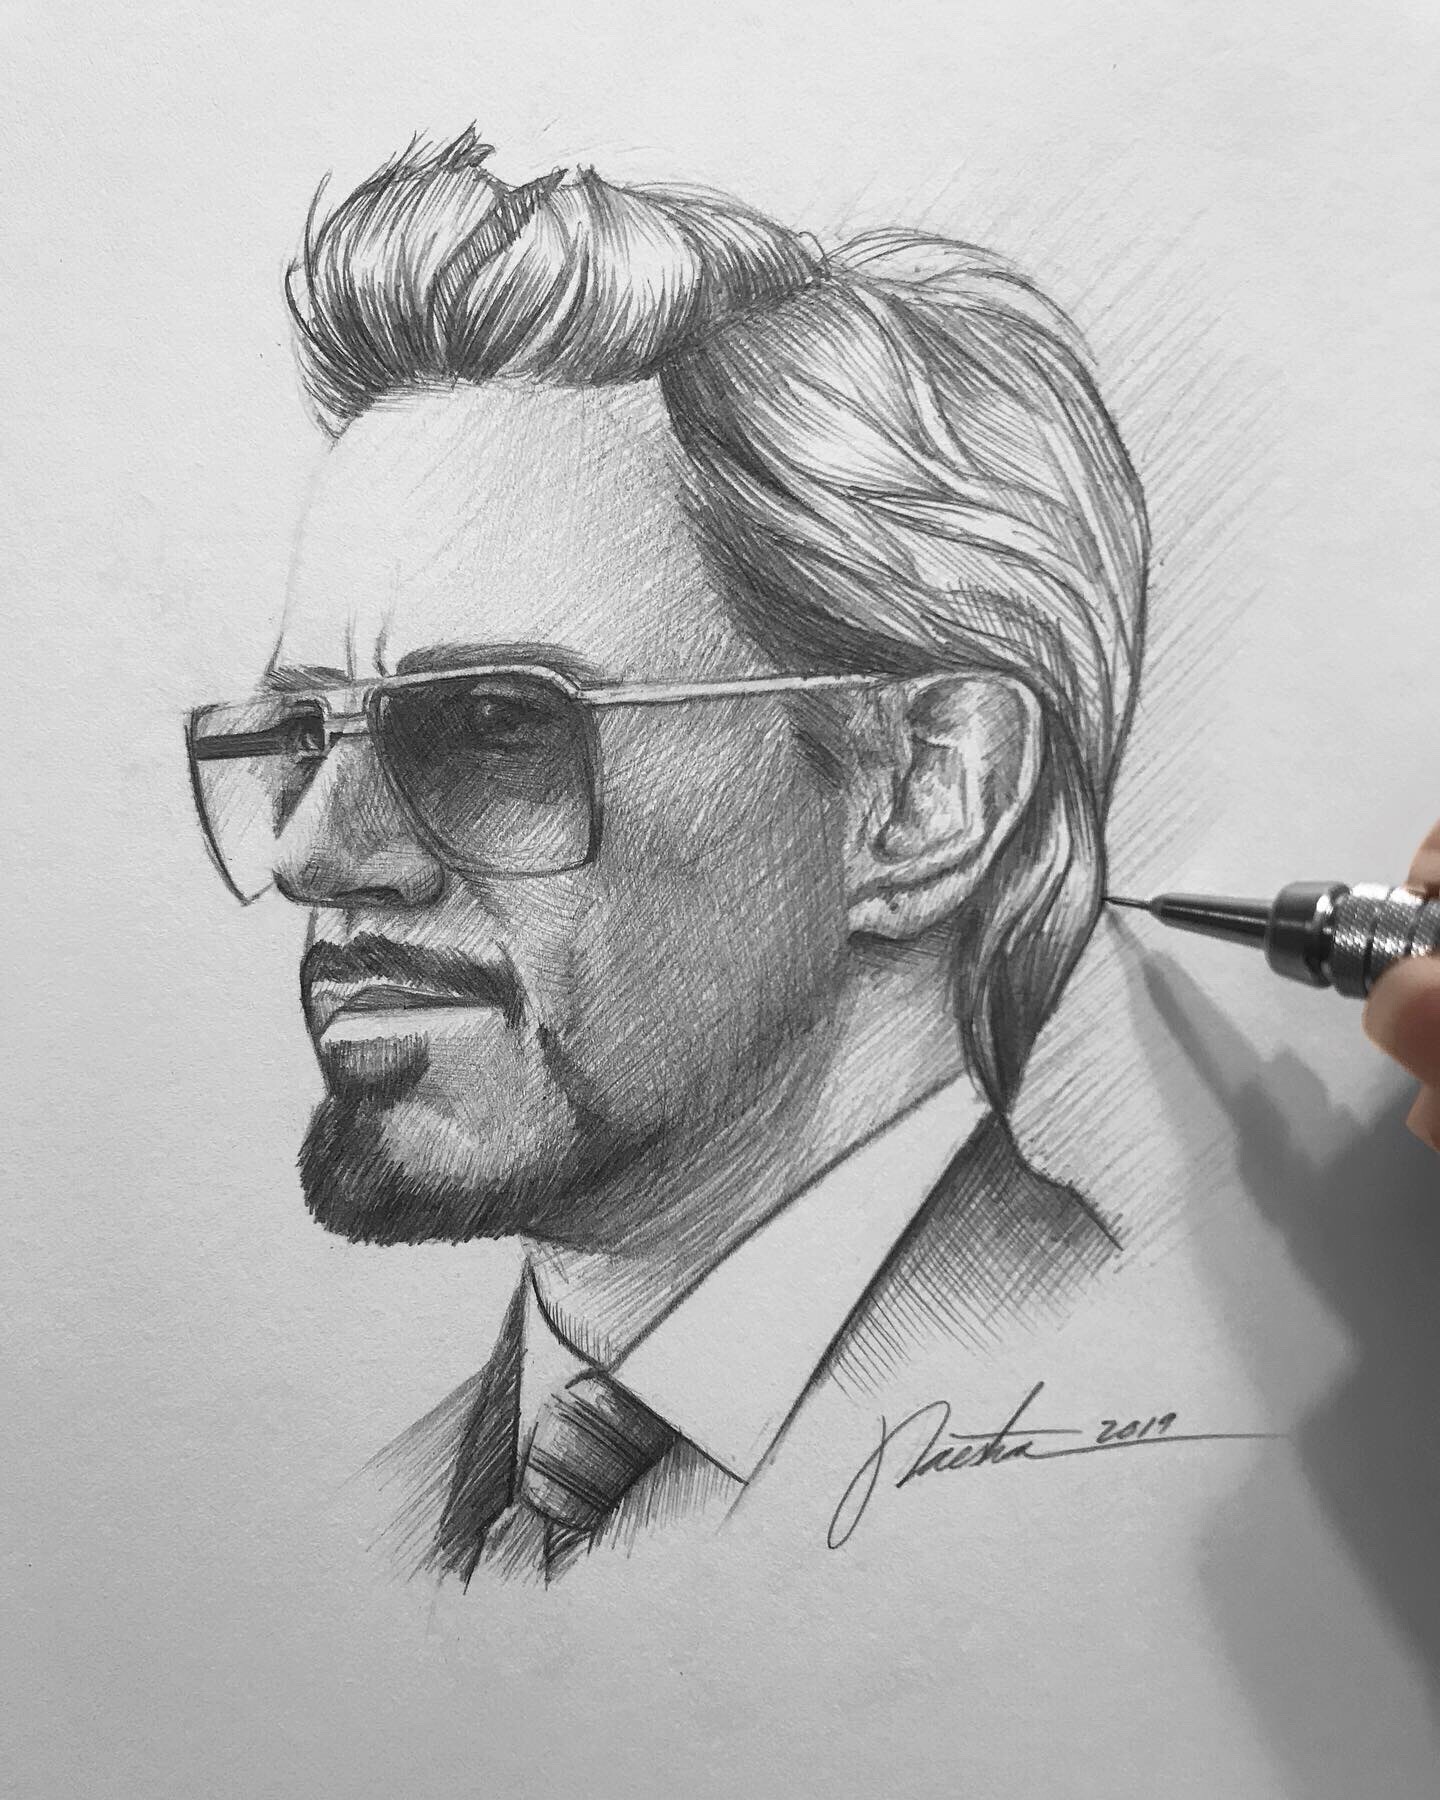 How to Draw Iron Man VIDEO & Step-by-Step Pictures